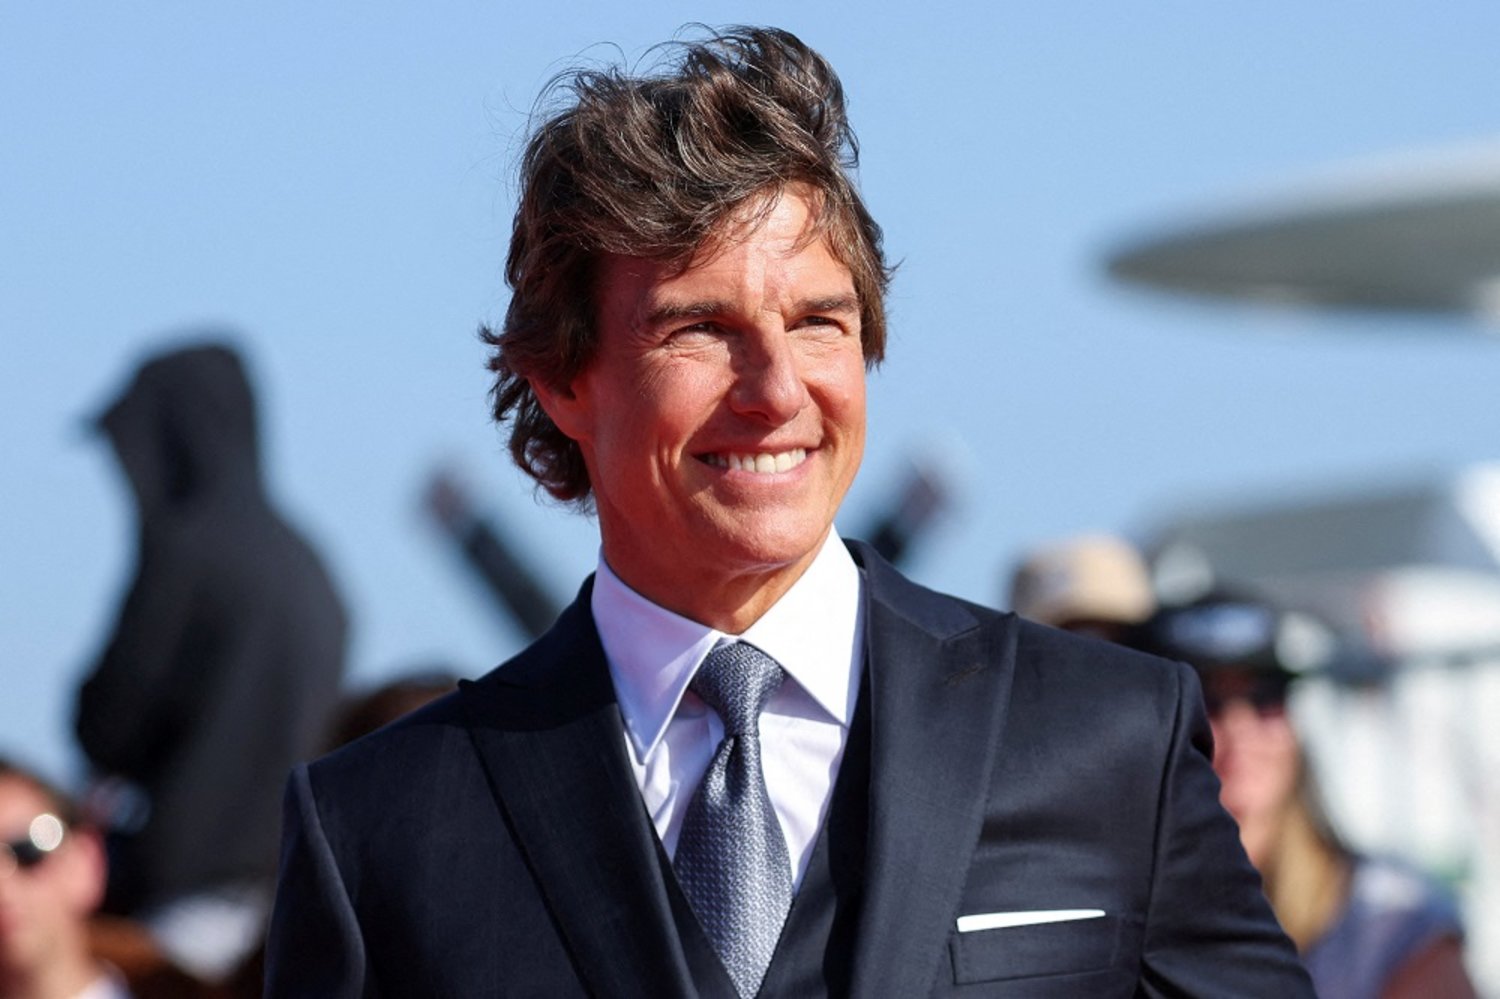 Tom Cruise Still Chasing His Dream Movie Like Clint Eastwood's 'Unforgiven